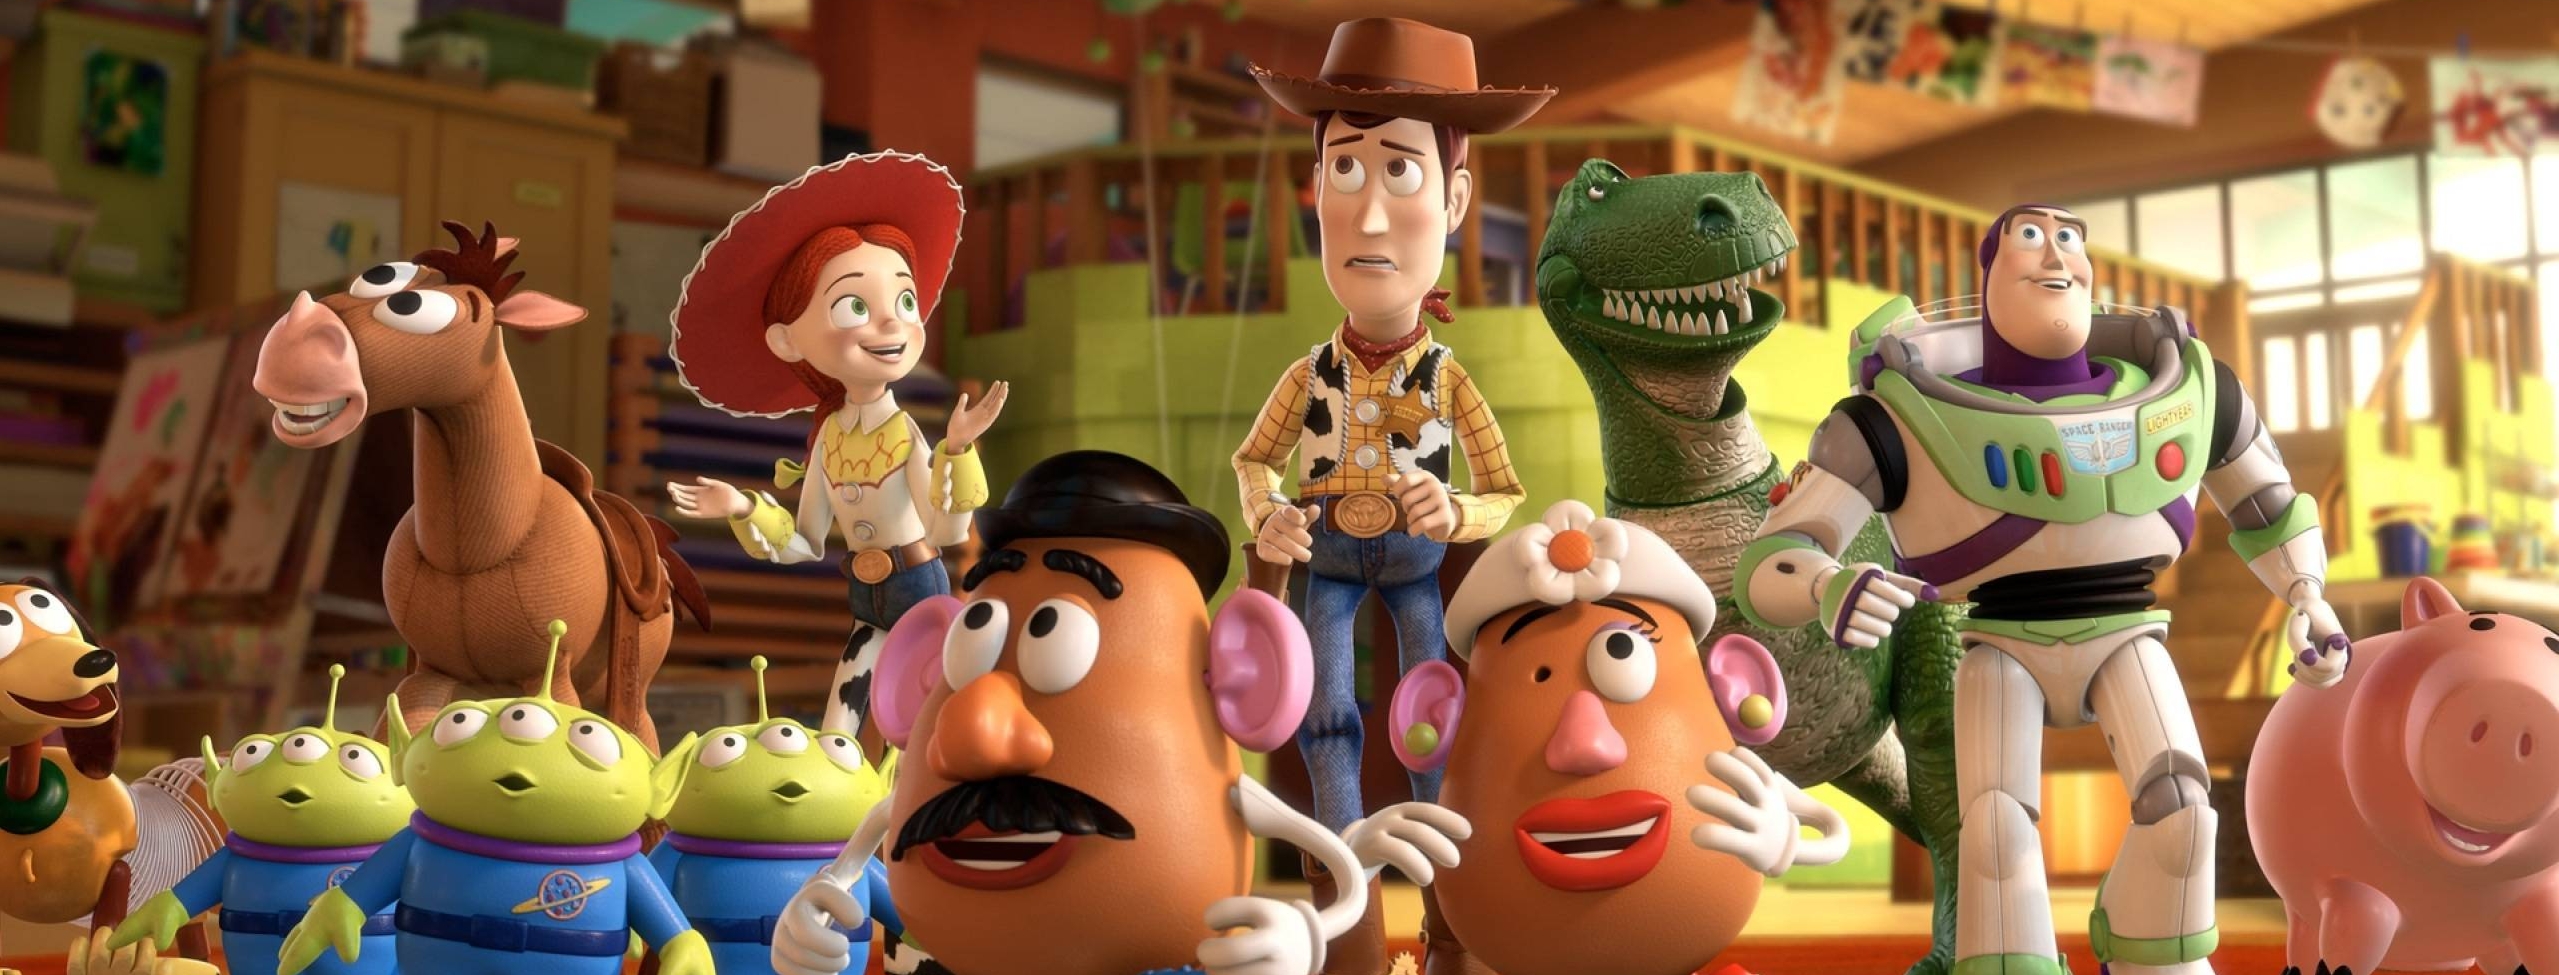 The Toy Story Blu-ray Steelbooks are Releasing Exclusively to Zavvi